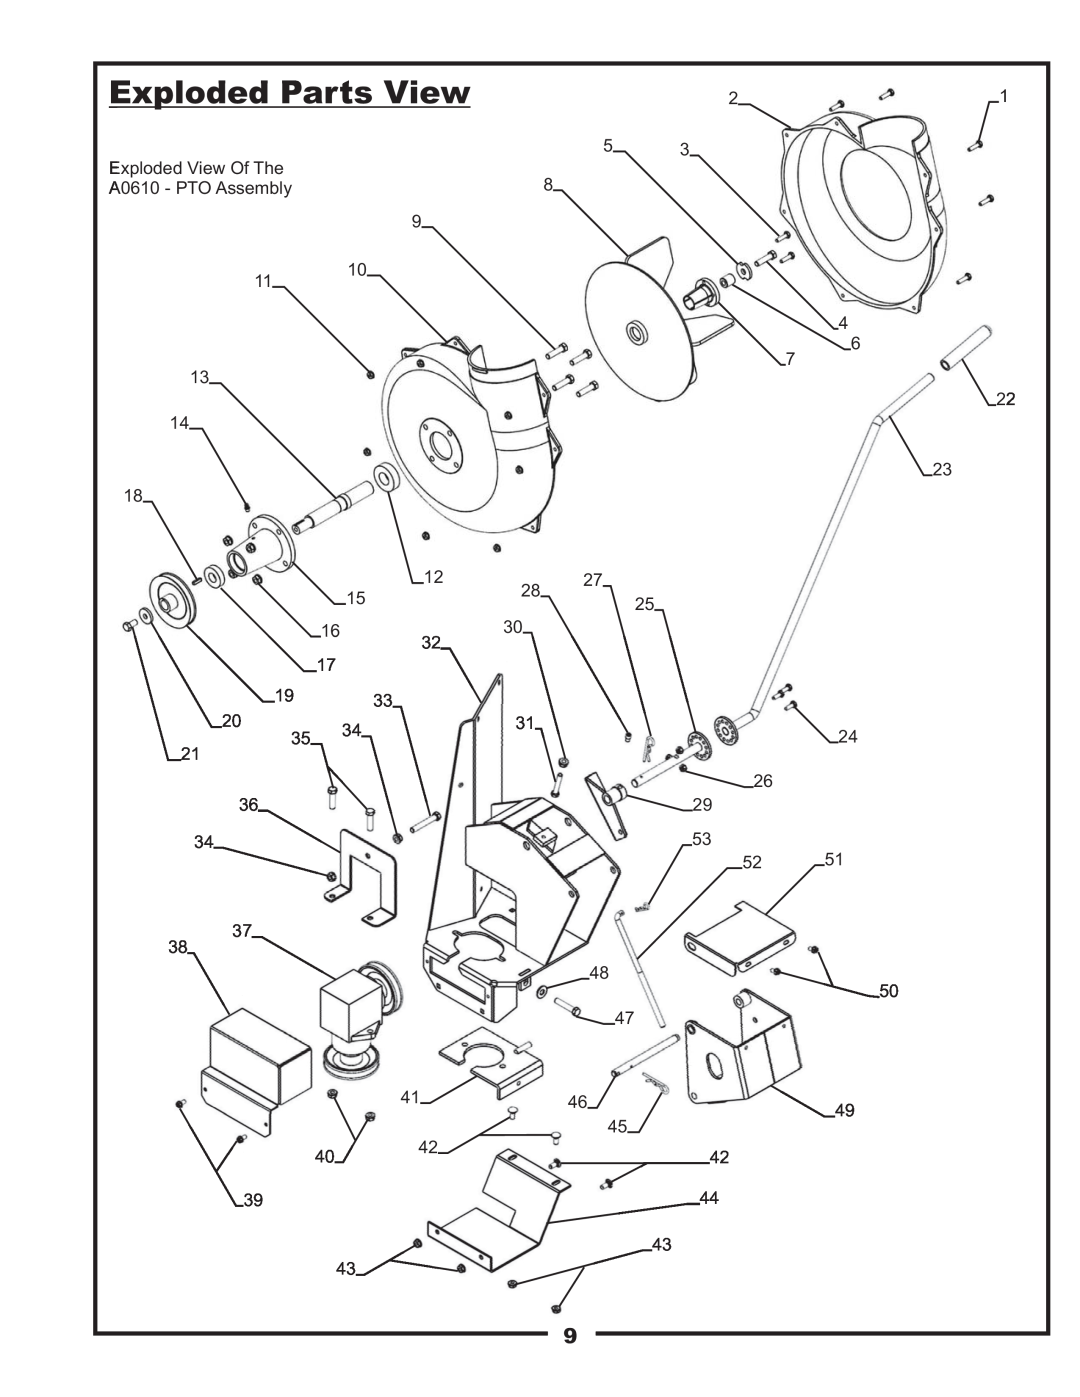 Bad Boy Mowers PUP Series, 48031001 manual Exploded Parts View, Exploded View Of The, A0610 - PTO Assembly 